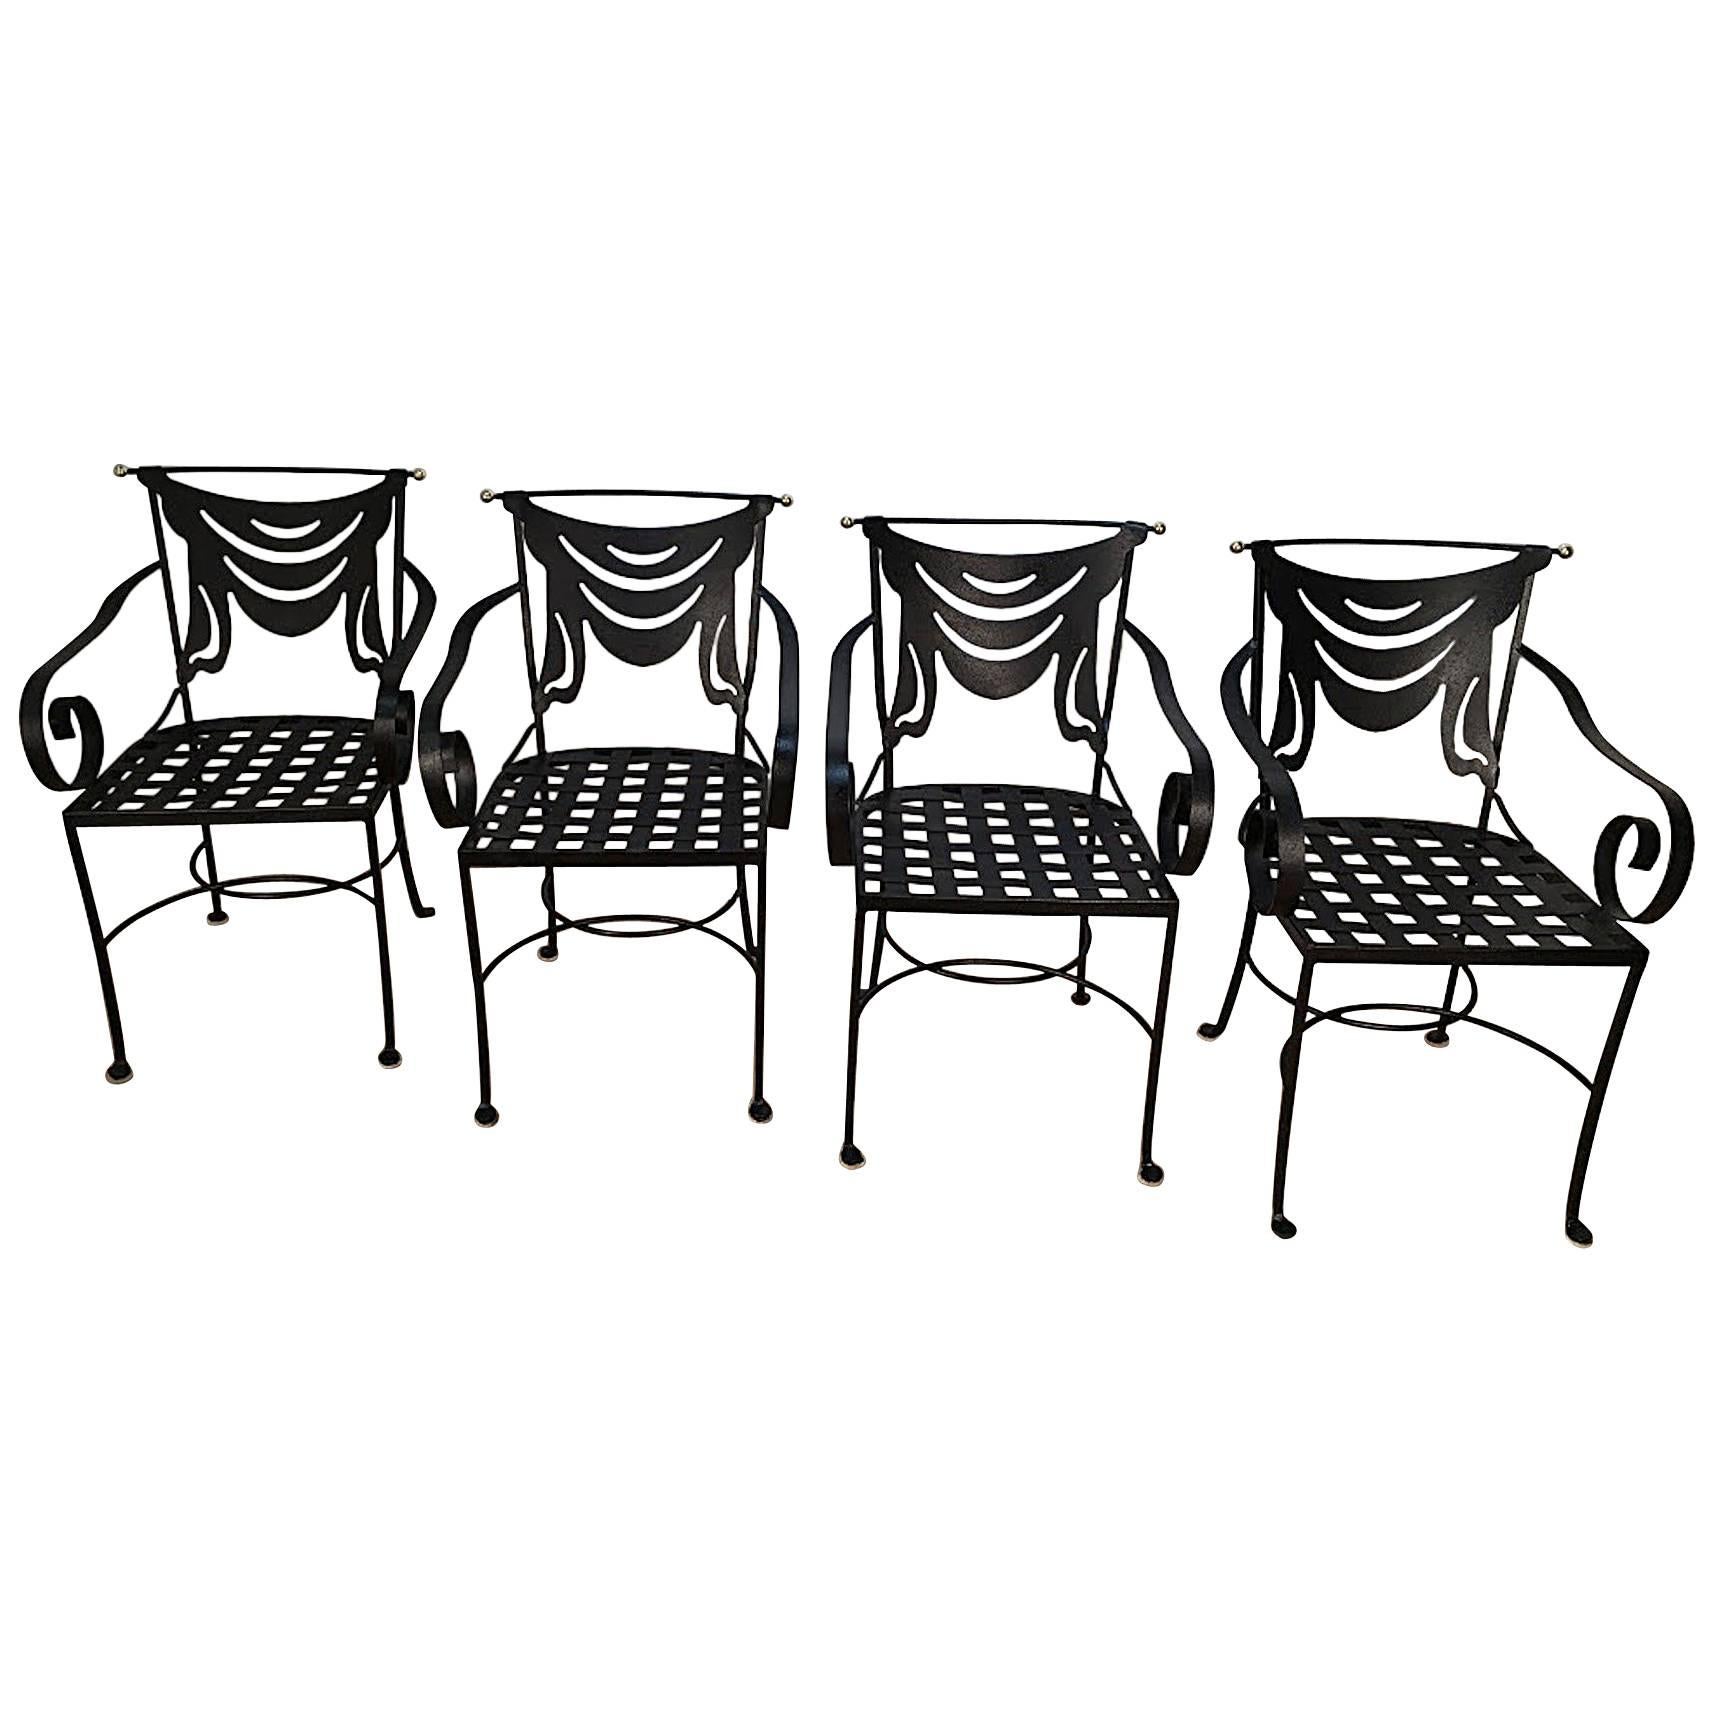 Set of Italian four iron and brass neoclassical armchairs, each one with pierced draped backrest and woven iron seat. Measure: The seat height is 16.5 inches.